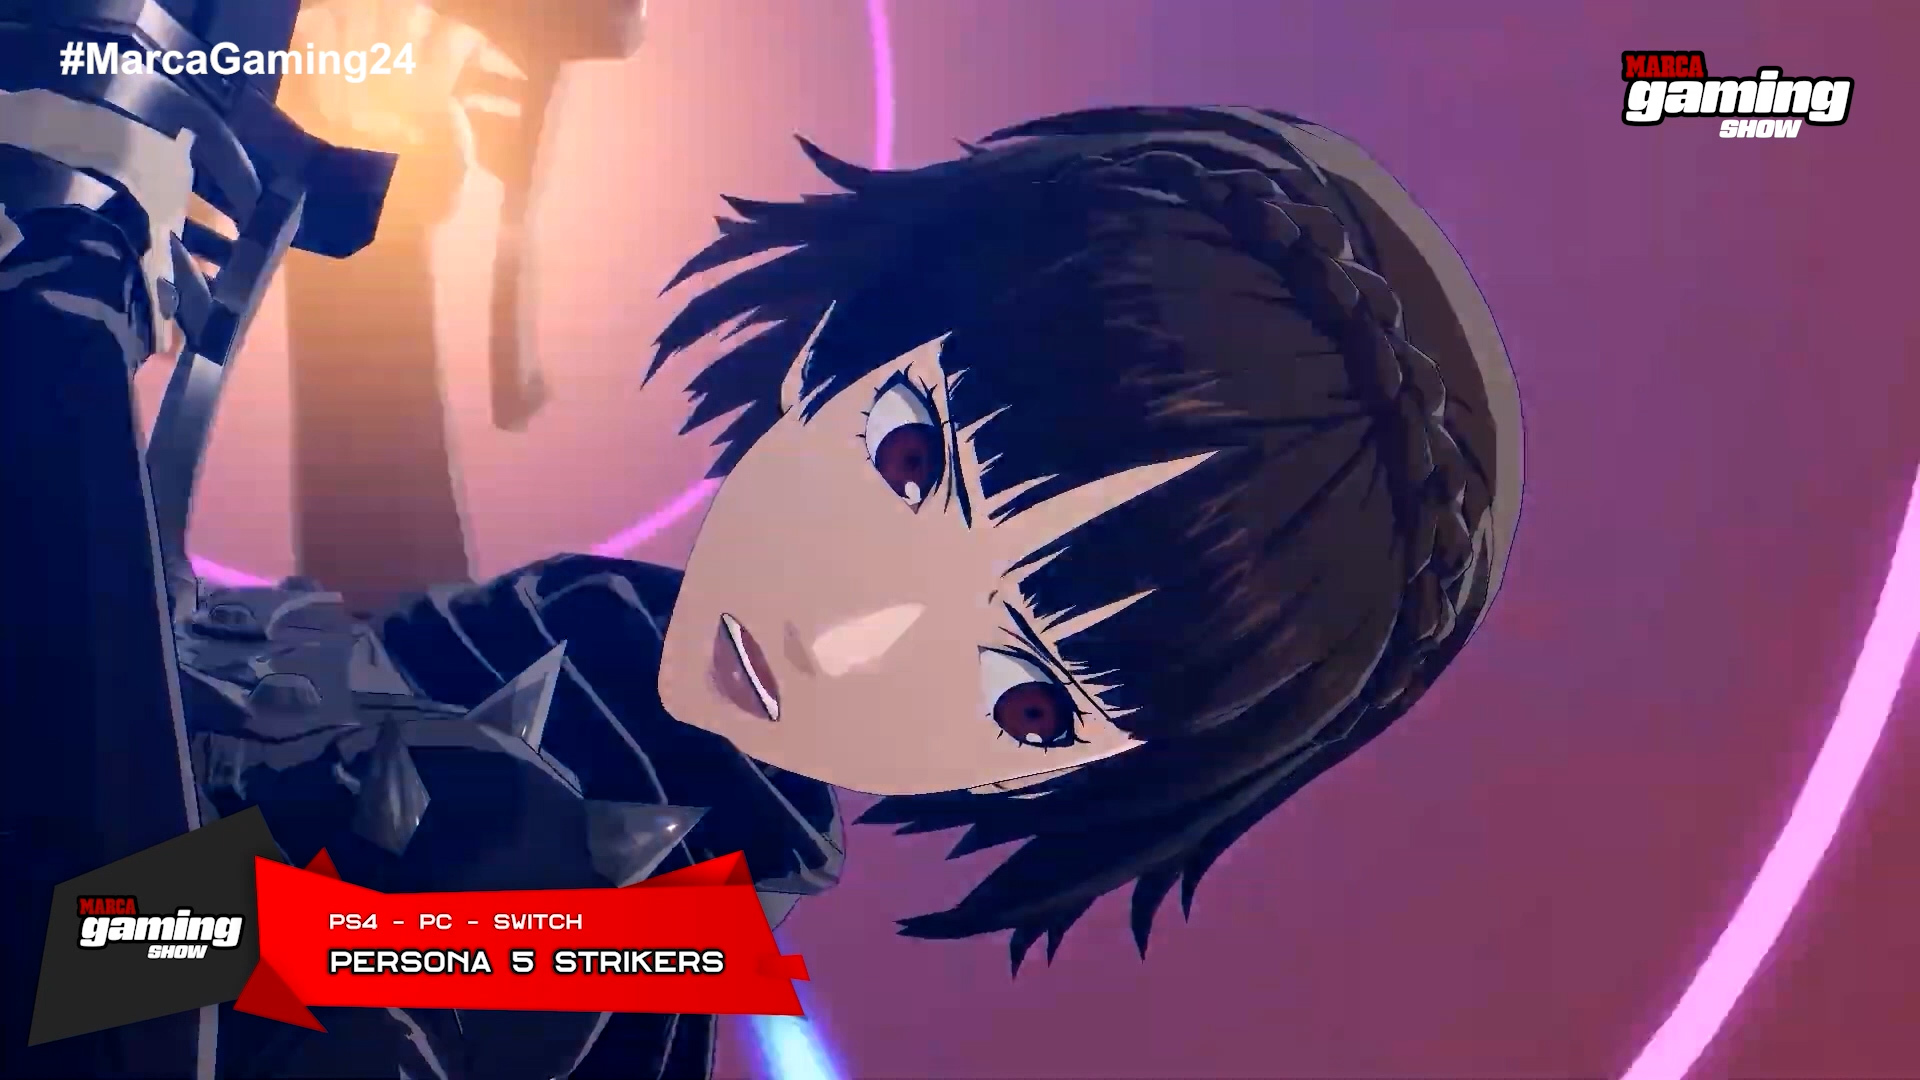 Persona 5 Strikers (PC - PS4 - SWITCH)